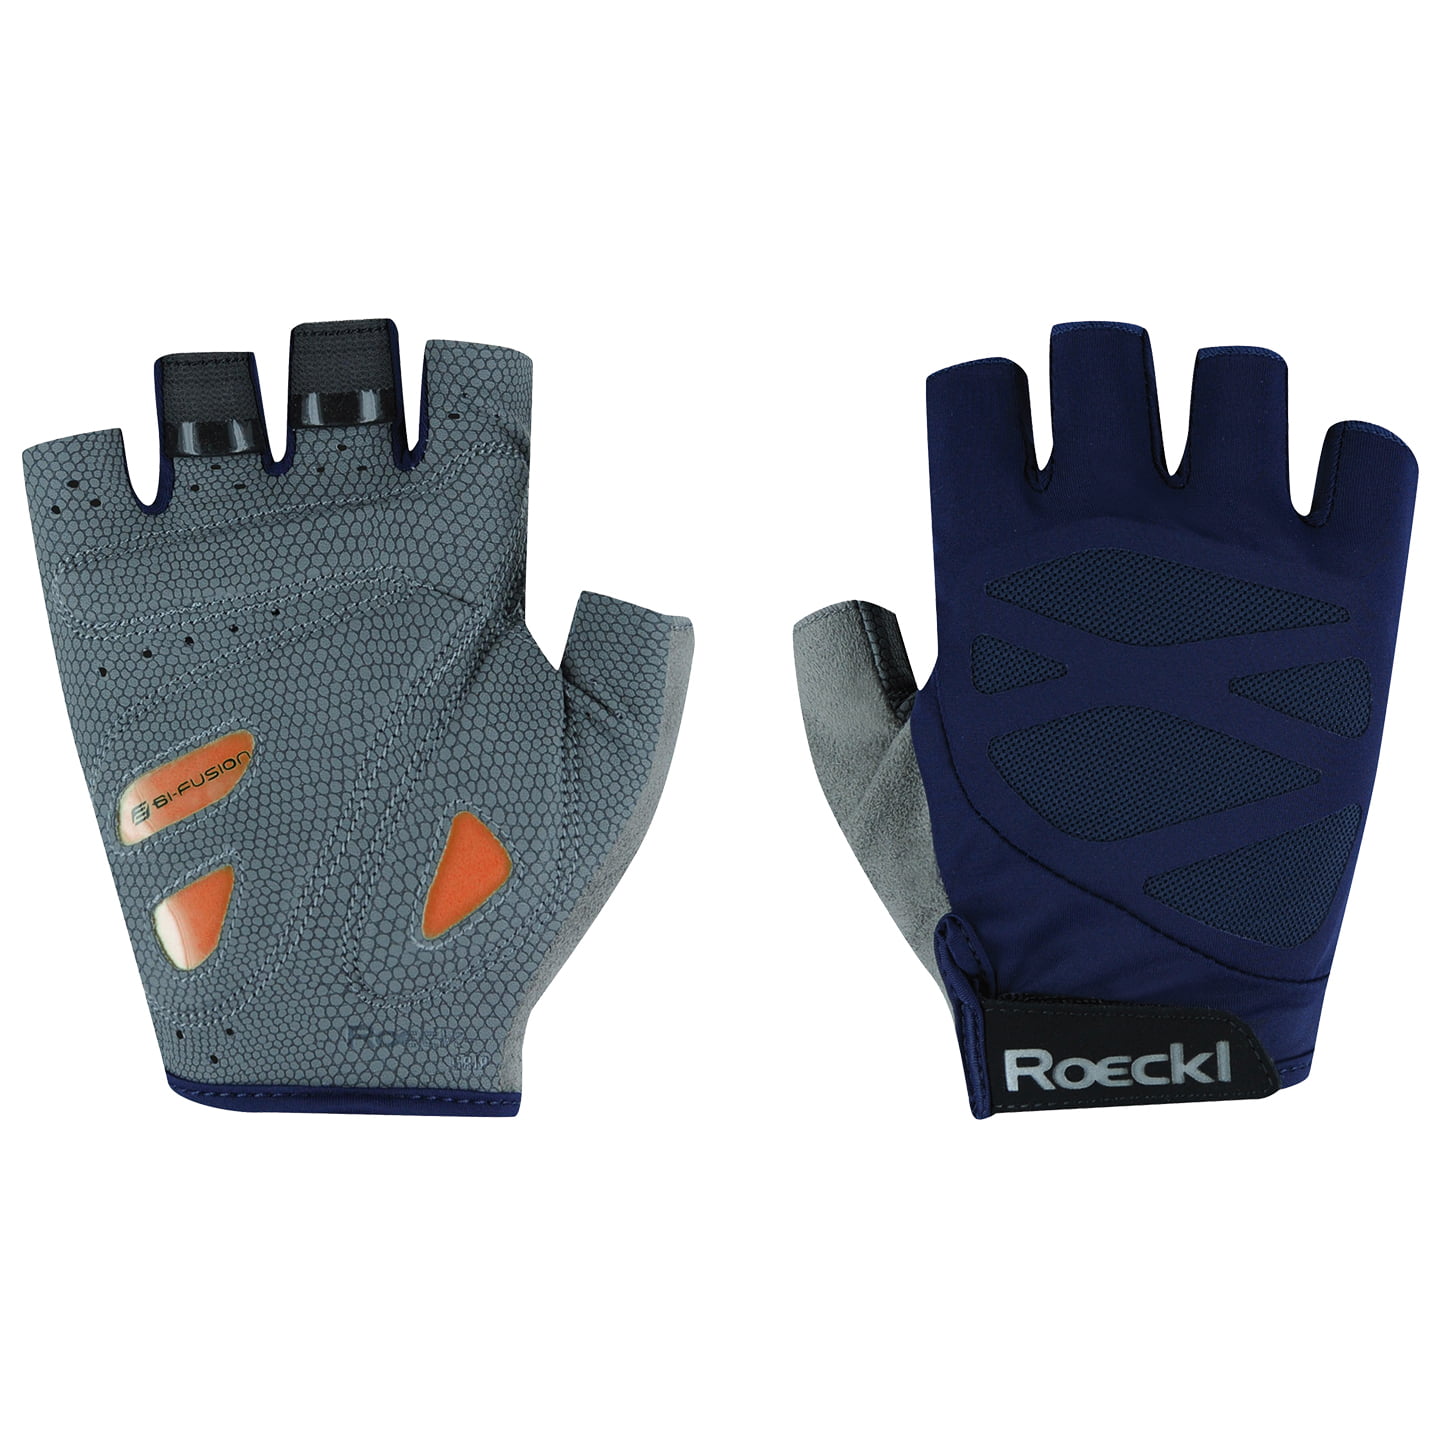 ROECKL Iton Gloves, for men, size 9,5, Bike gloves, Cycling wear